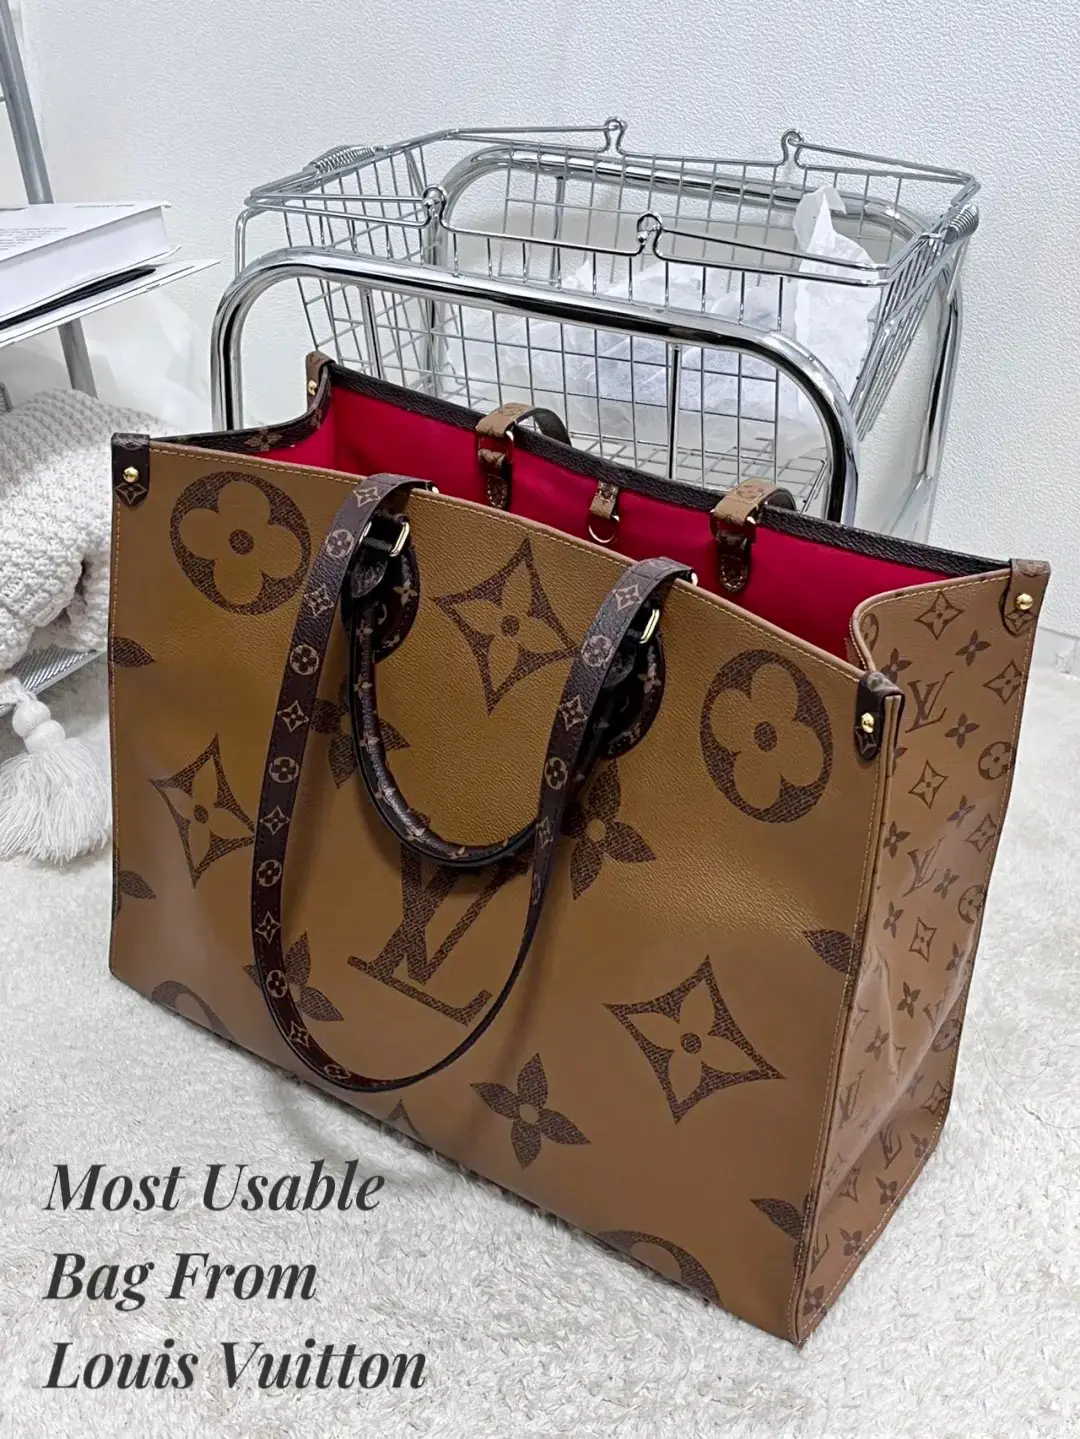 1 YEAR REVIEW OF LOUIS VUITTON ON THE GO GM TOTE